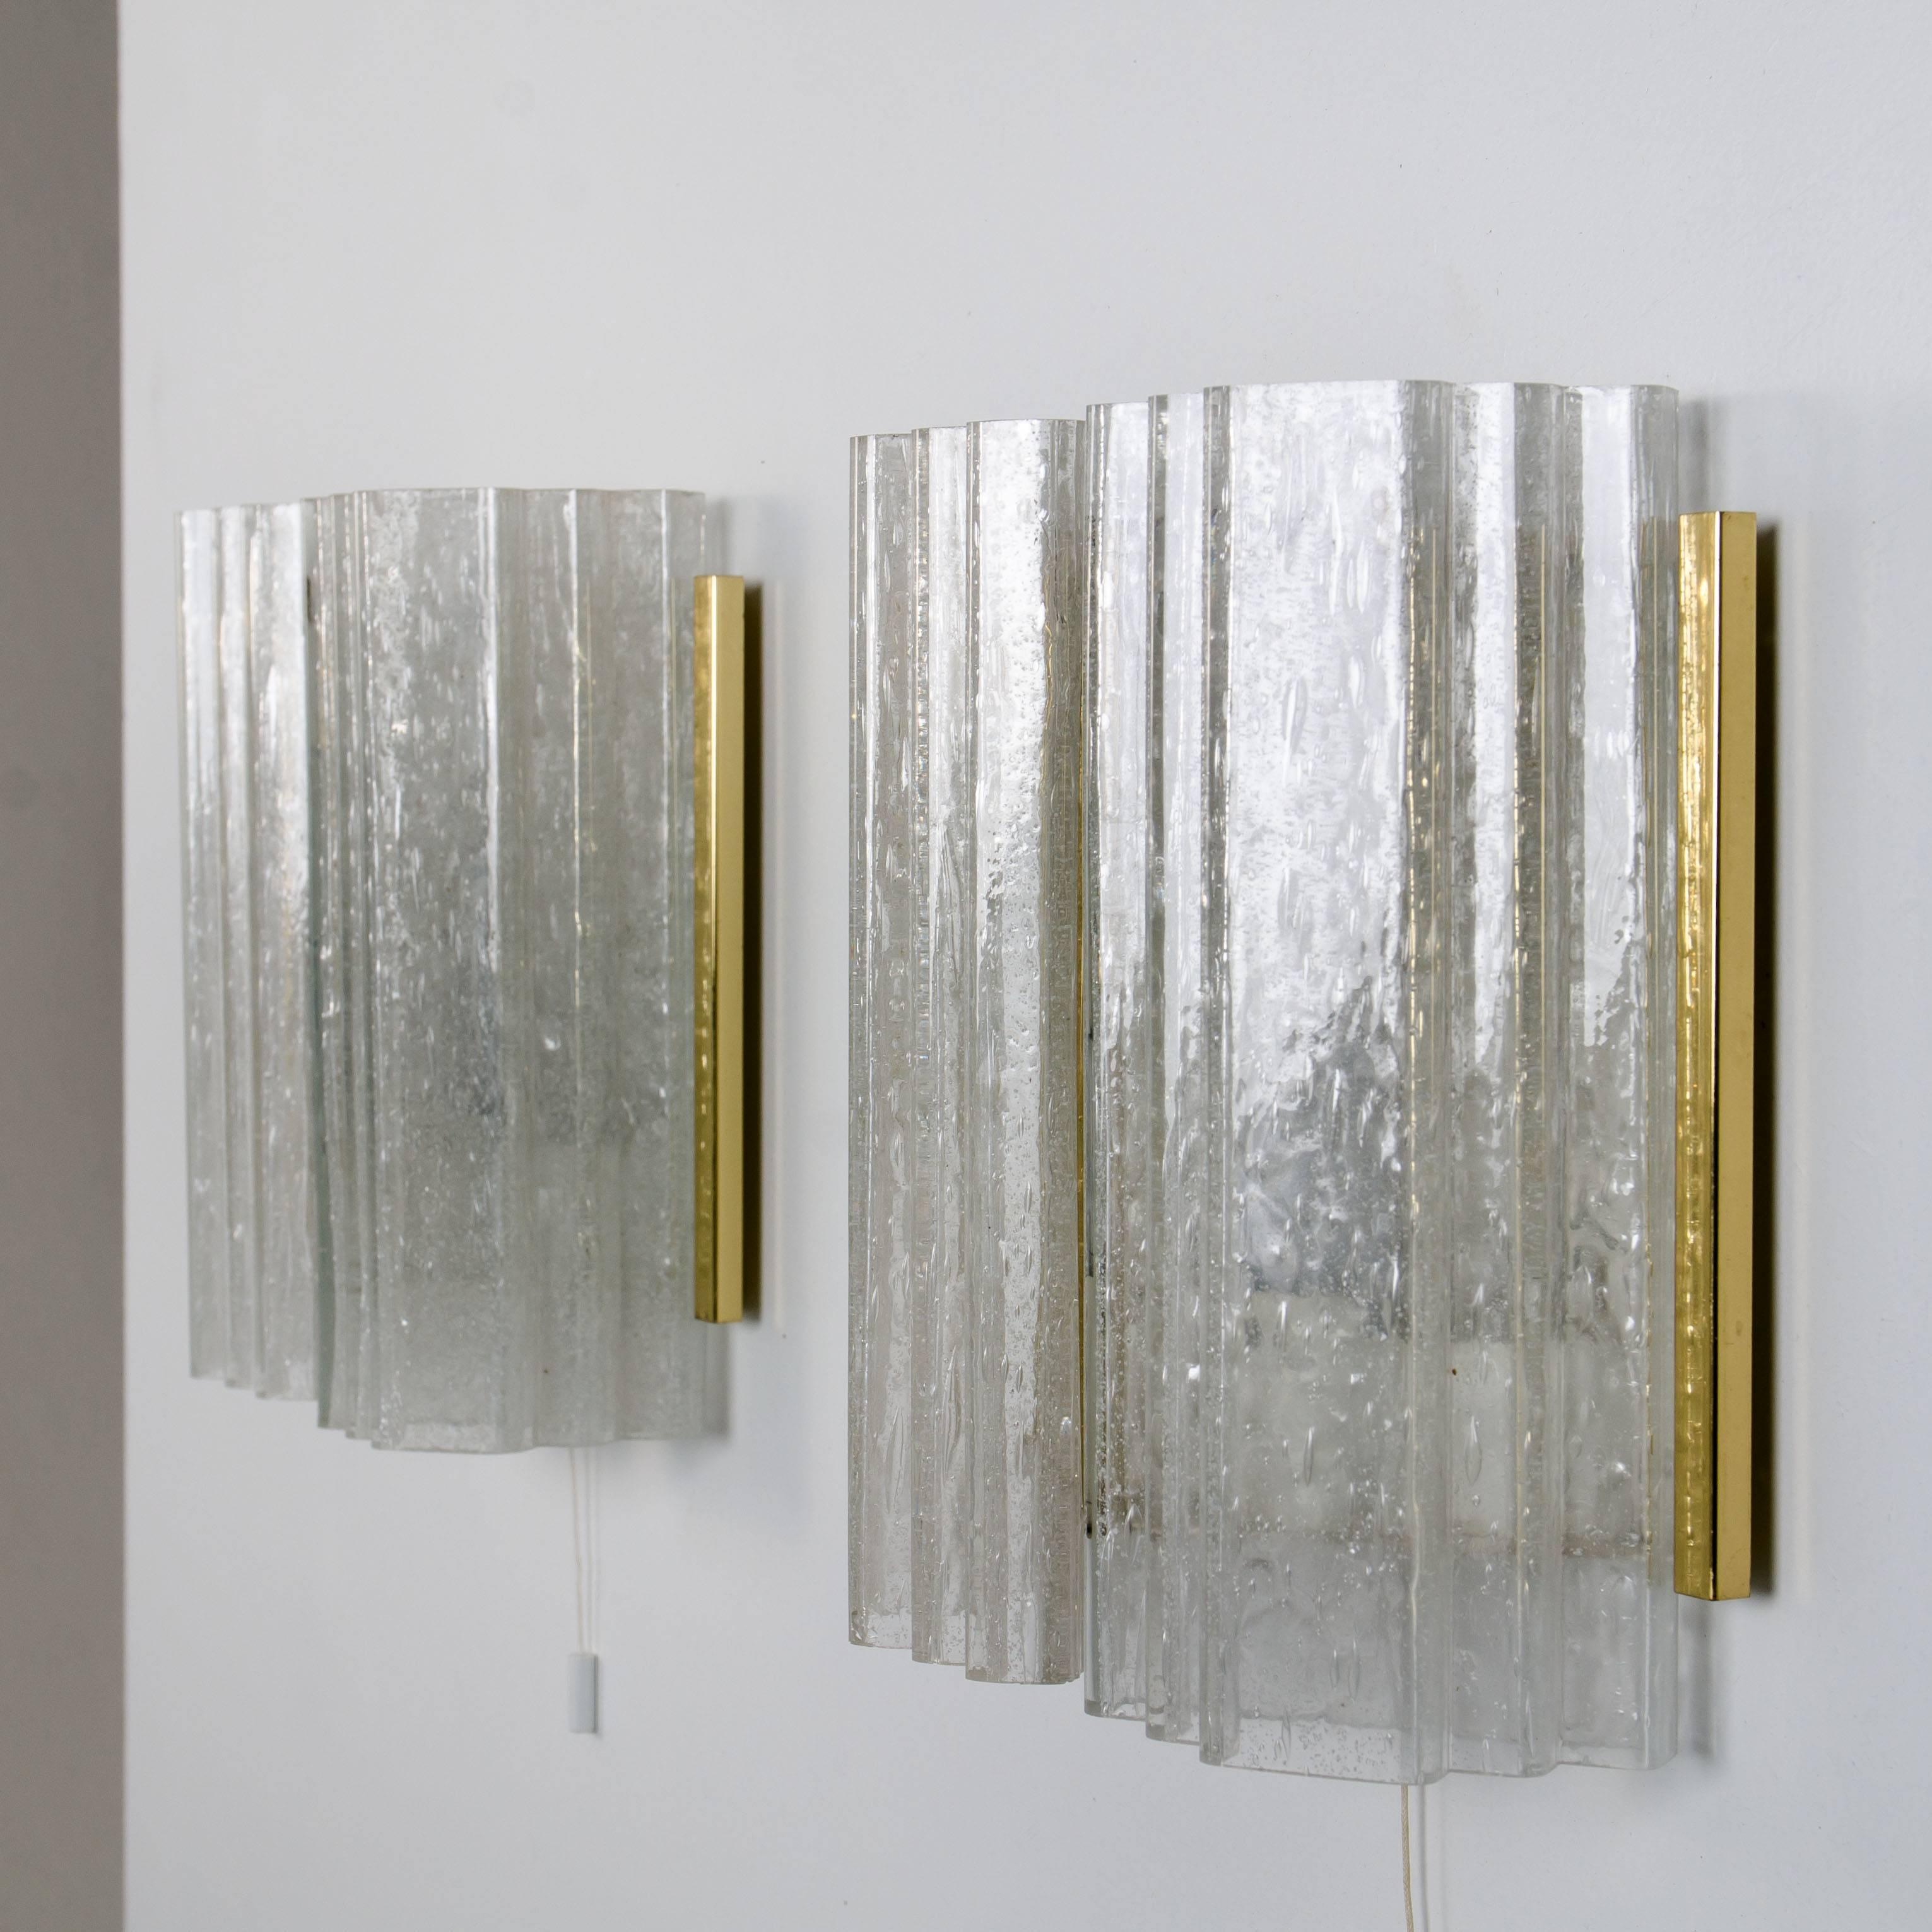 This wall sconces are designed by Doria. Each wall fixture is made from white pained metal with brass details and it features two thick hand blown glass shades. The high quality crystal shades beautifully reflecting the light. 

Cleaned and